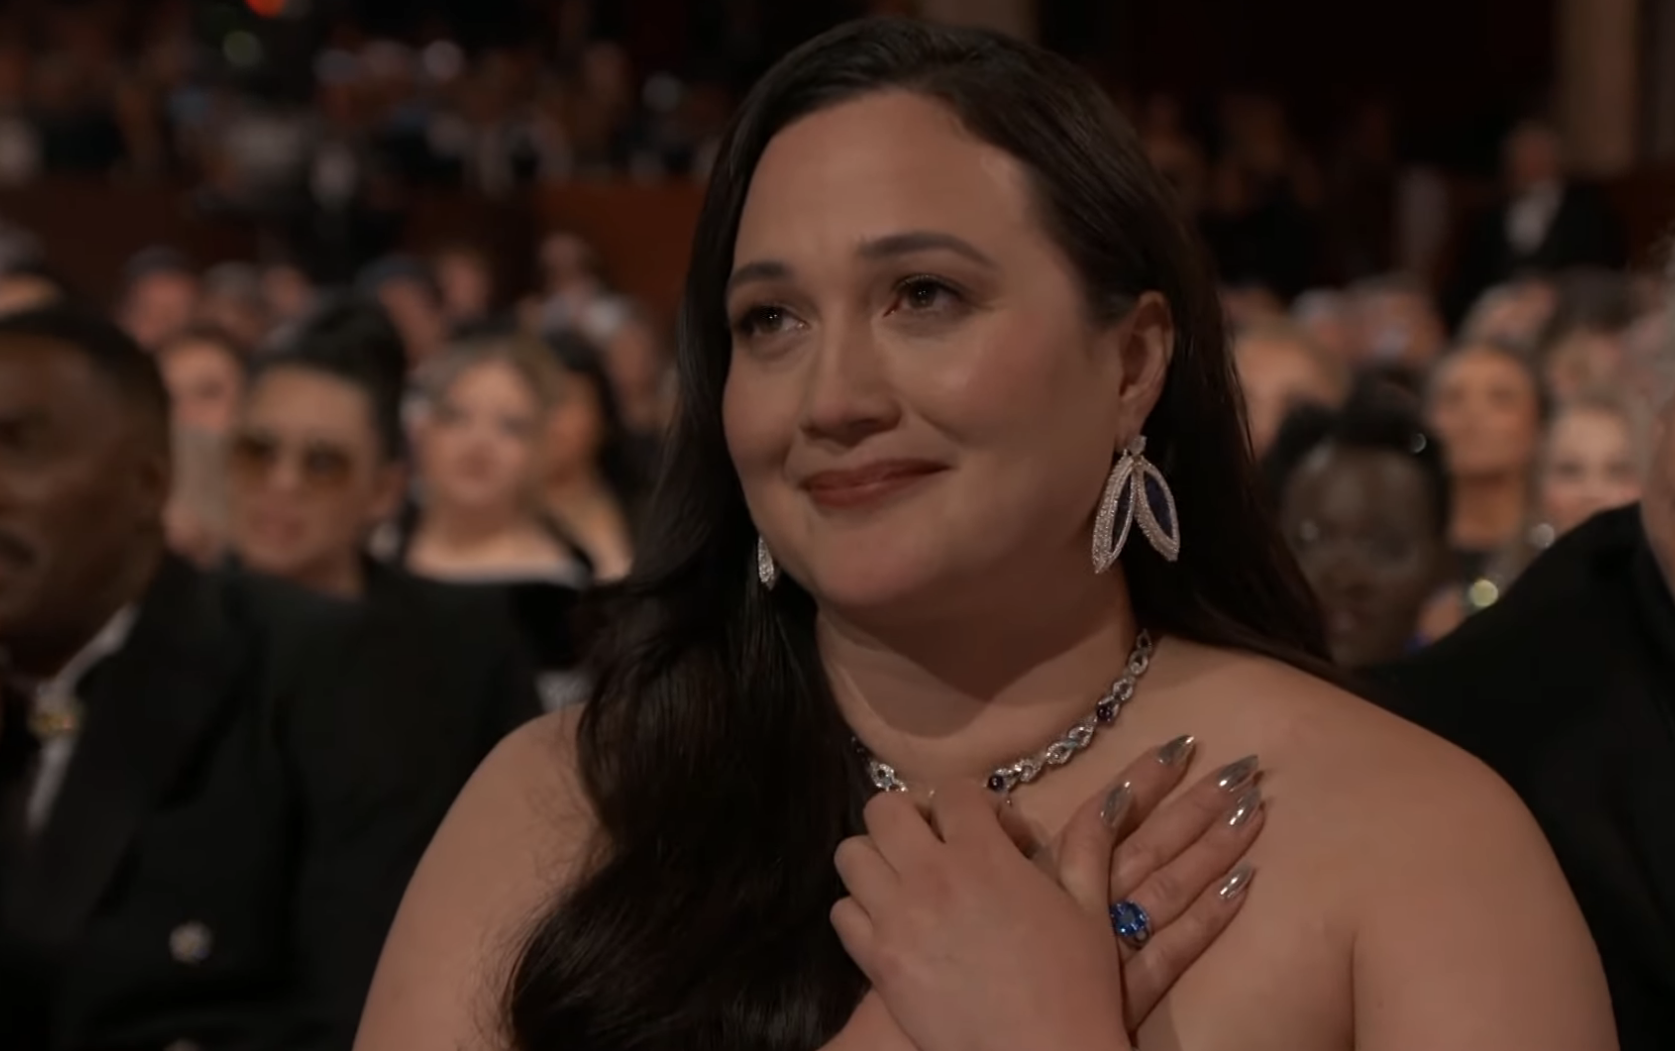 Lily at the Oscars, emotional, in the audience, wearing an elegant dress and drop earrings